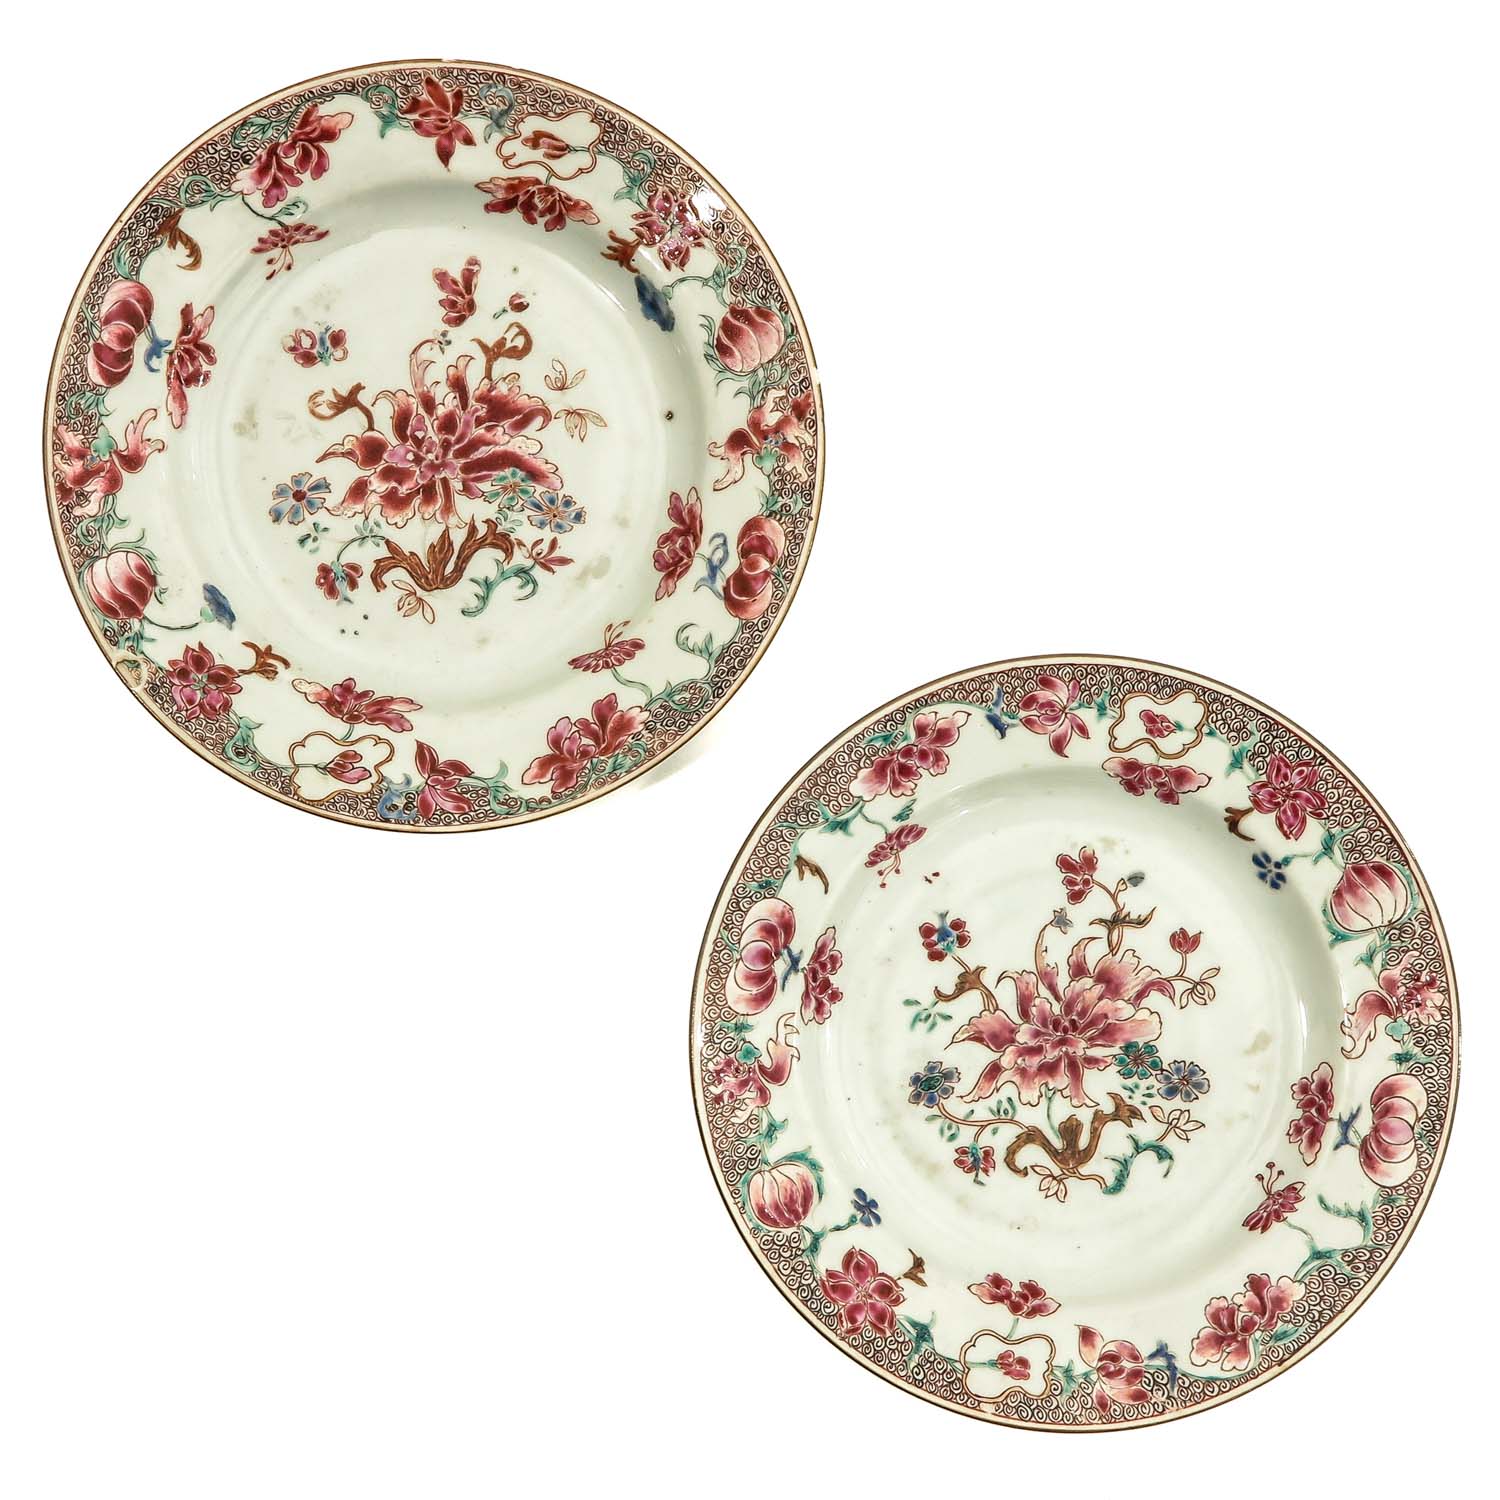 A Series of 4 Famille Rose Plates - Image 3 of 9